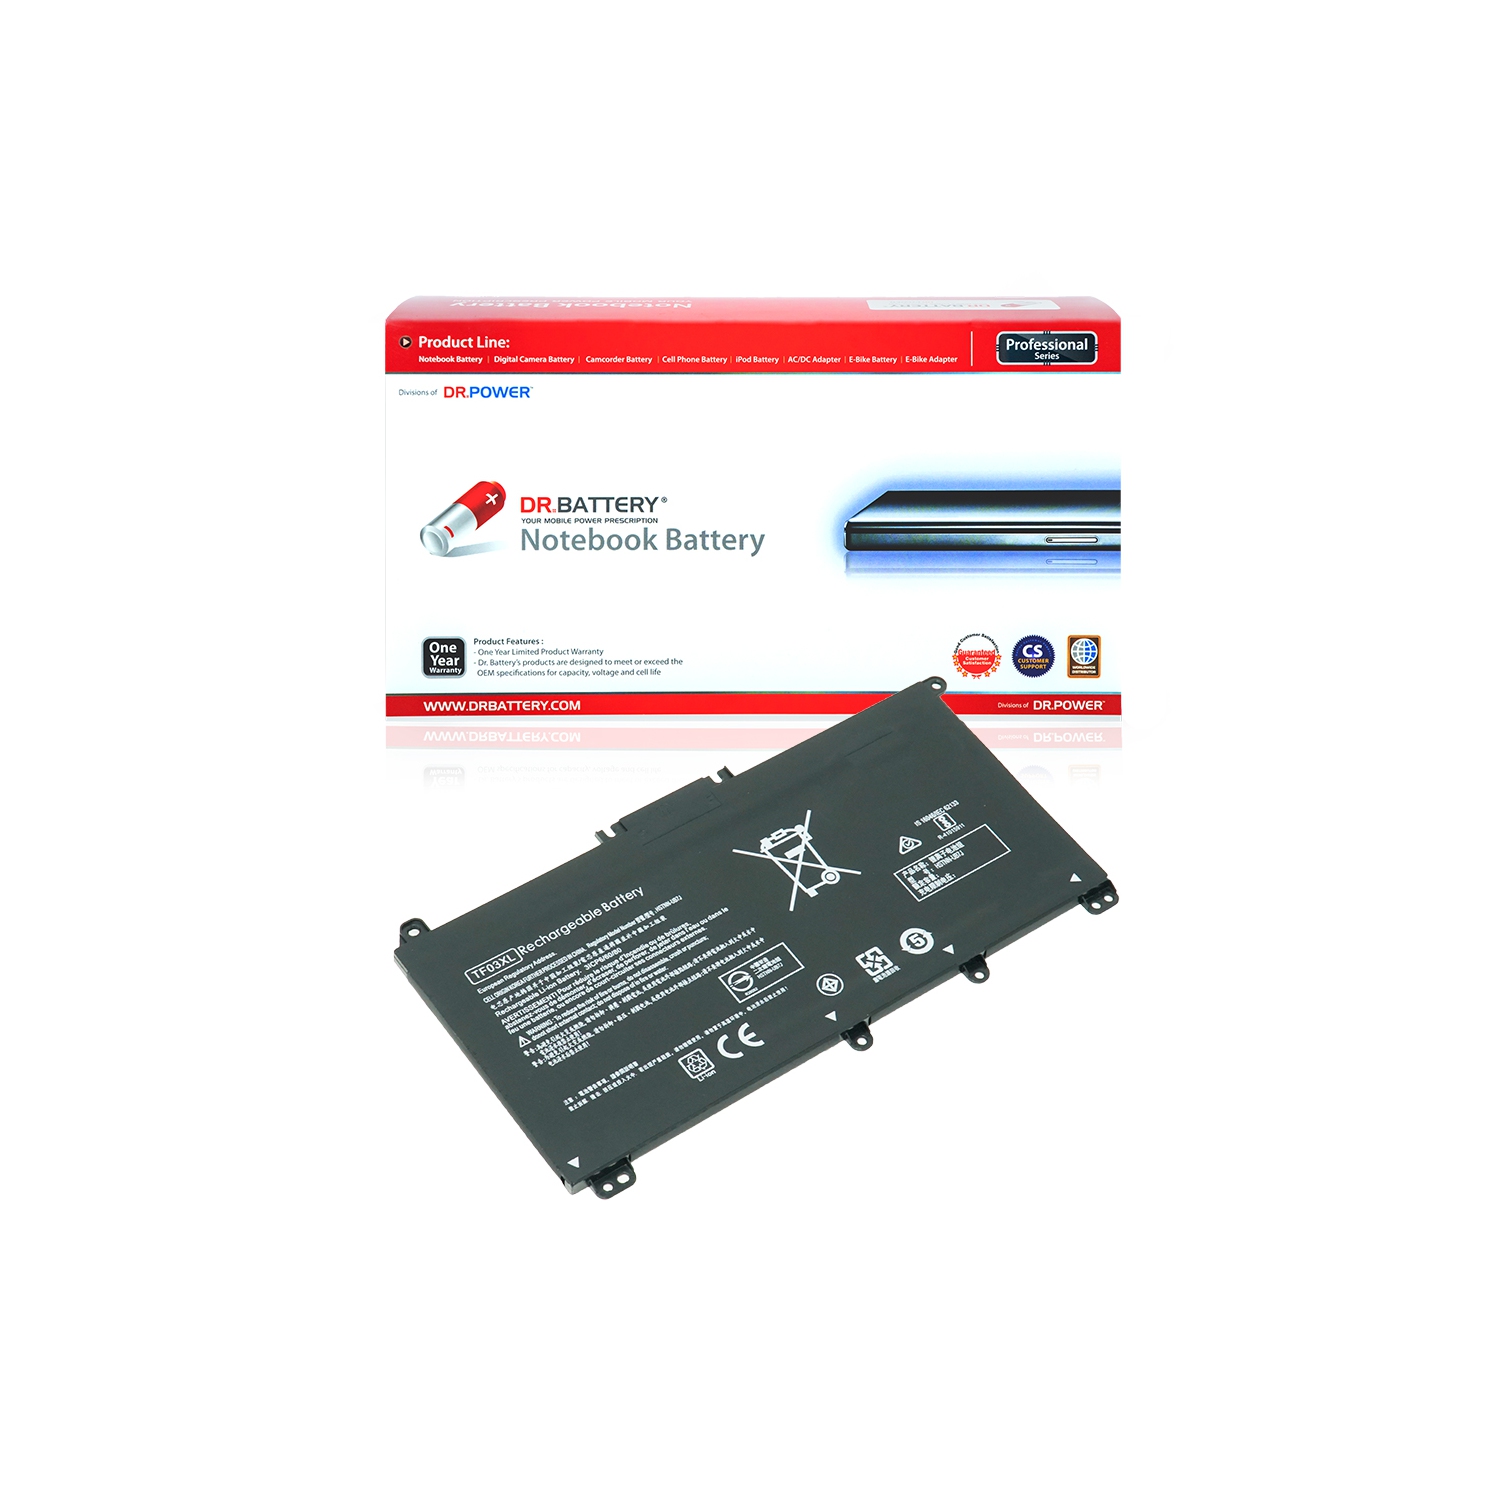 DR. BATTERY - Replacement for HP Pavilion x360 14-cd / TPN-Q188 / TPN-Q189 / TPN-Q190 / TPN-Q191 / TPN-Q192 / TPN-Q196